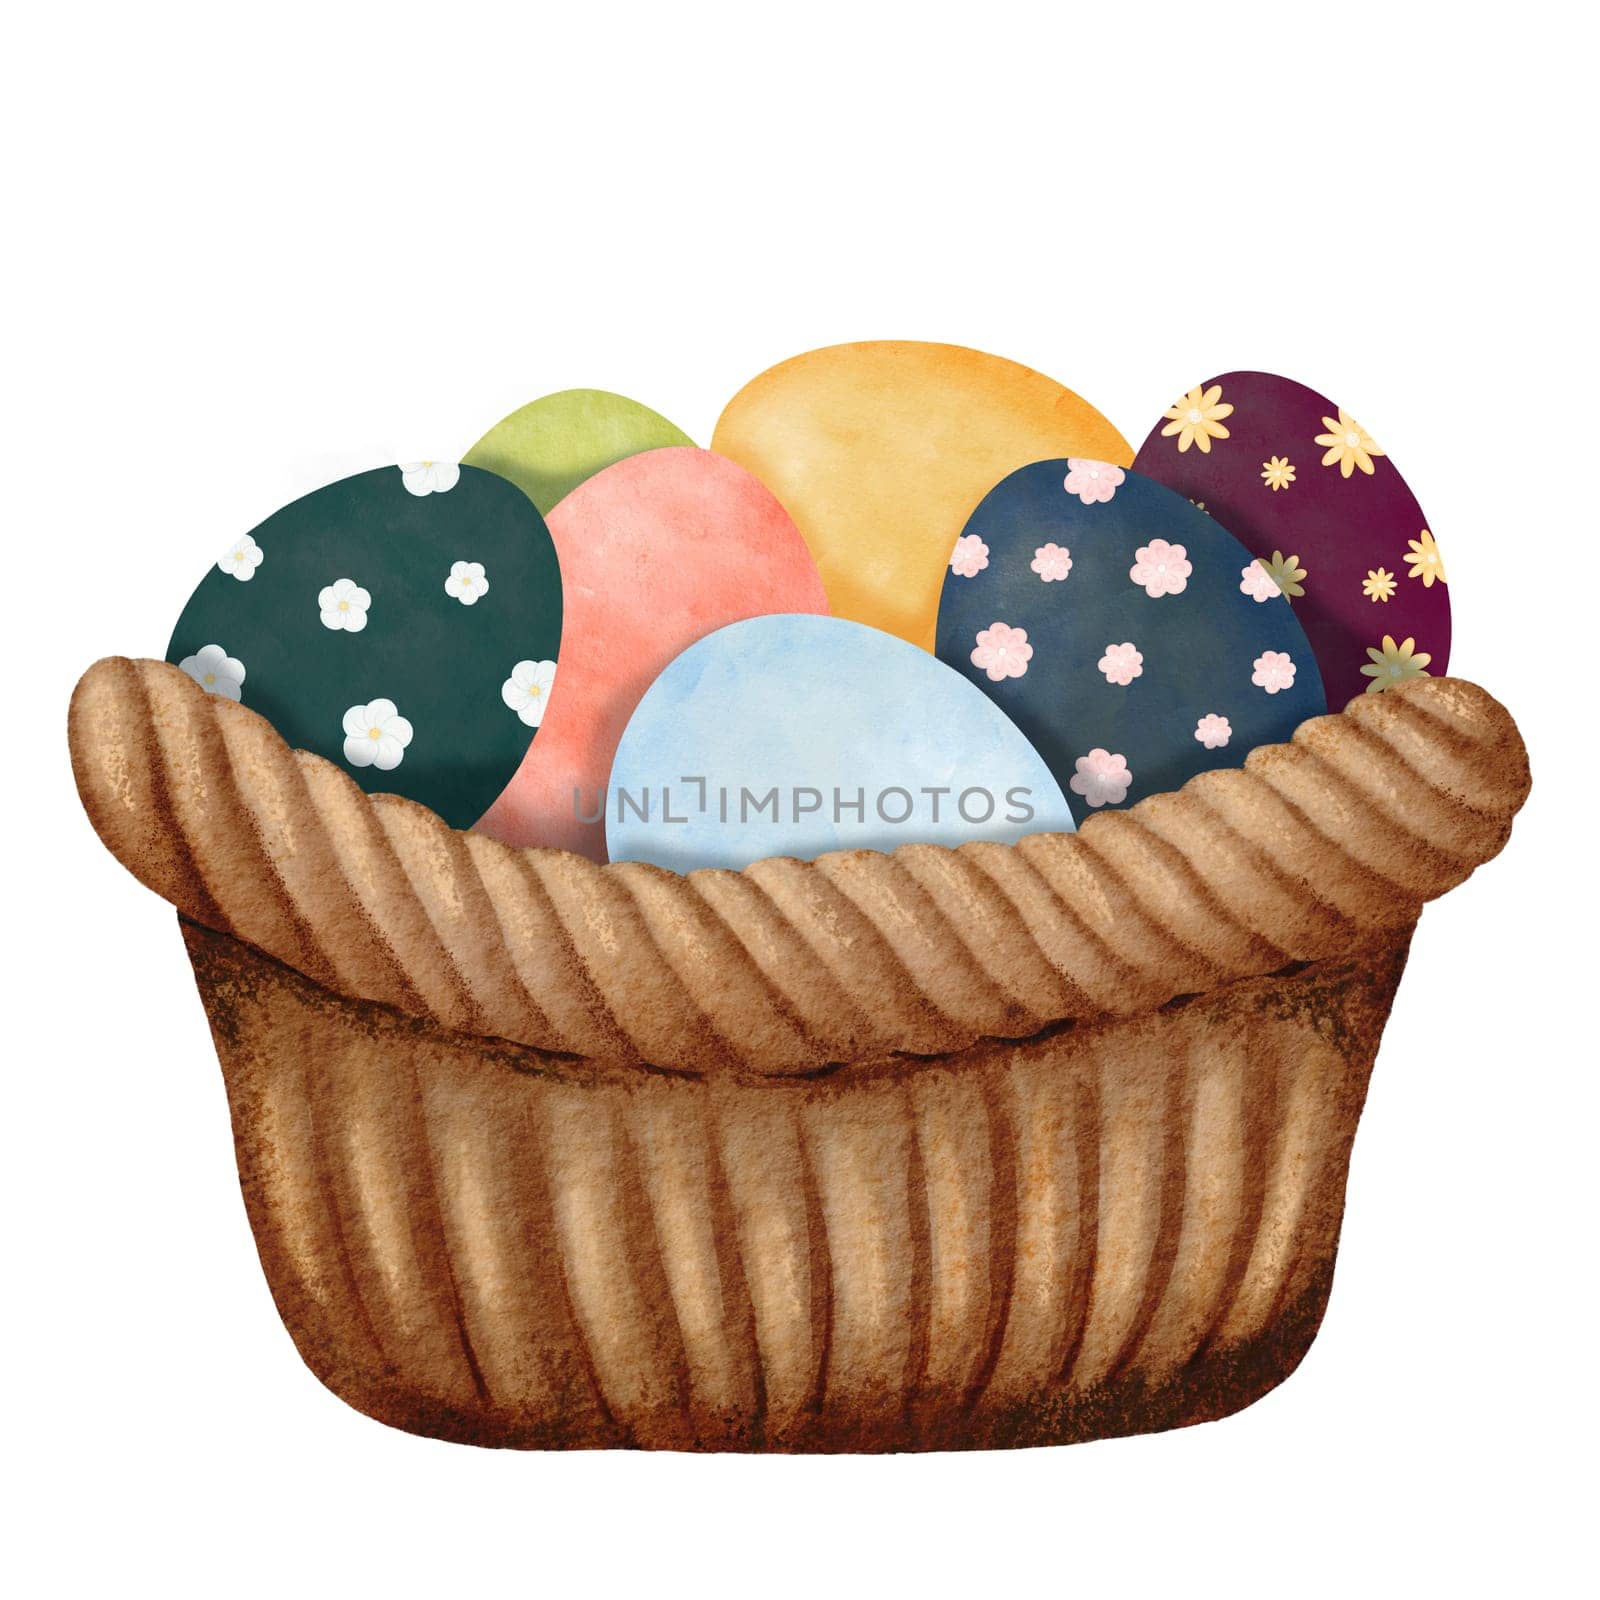 Woven basket filled with colorful Easter eggs. Eggs of various hues adorned with floral decorations. Watercolor illustration capturing the festive spirit, ideal for conveying the joy of Easter by Art_Mari_Ka